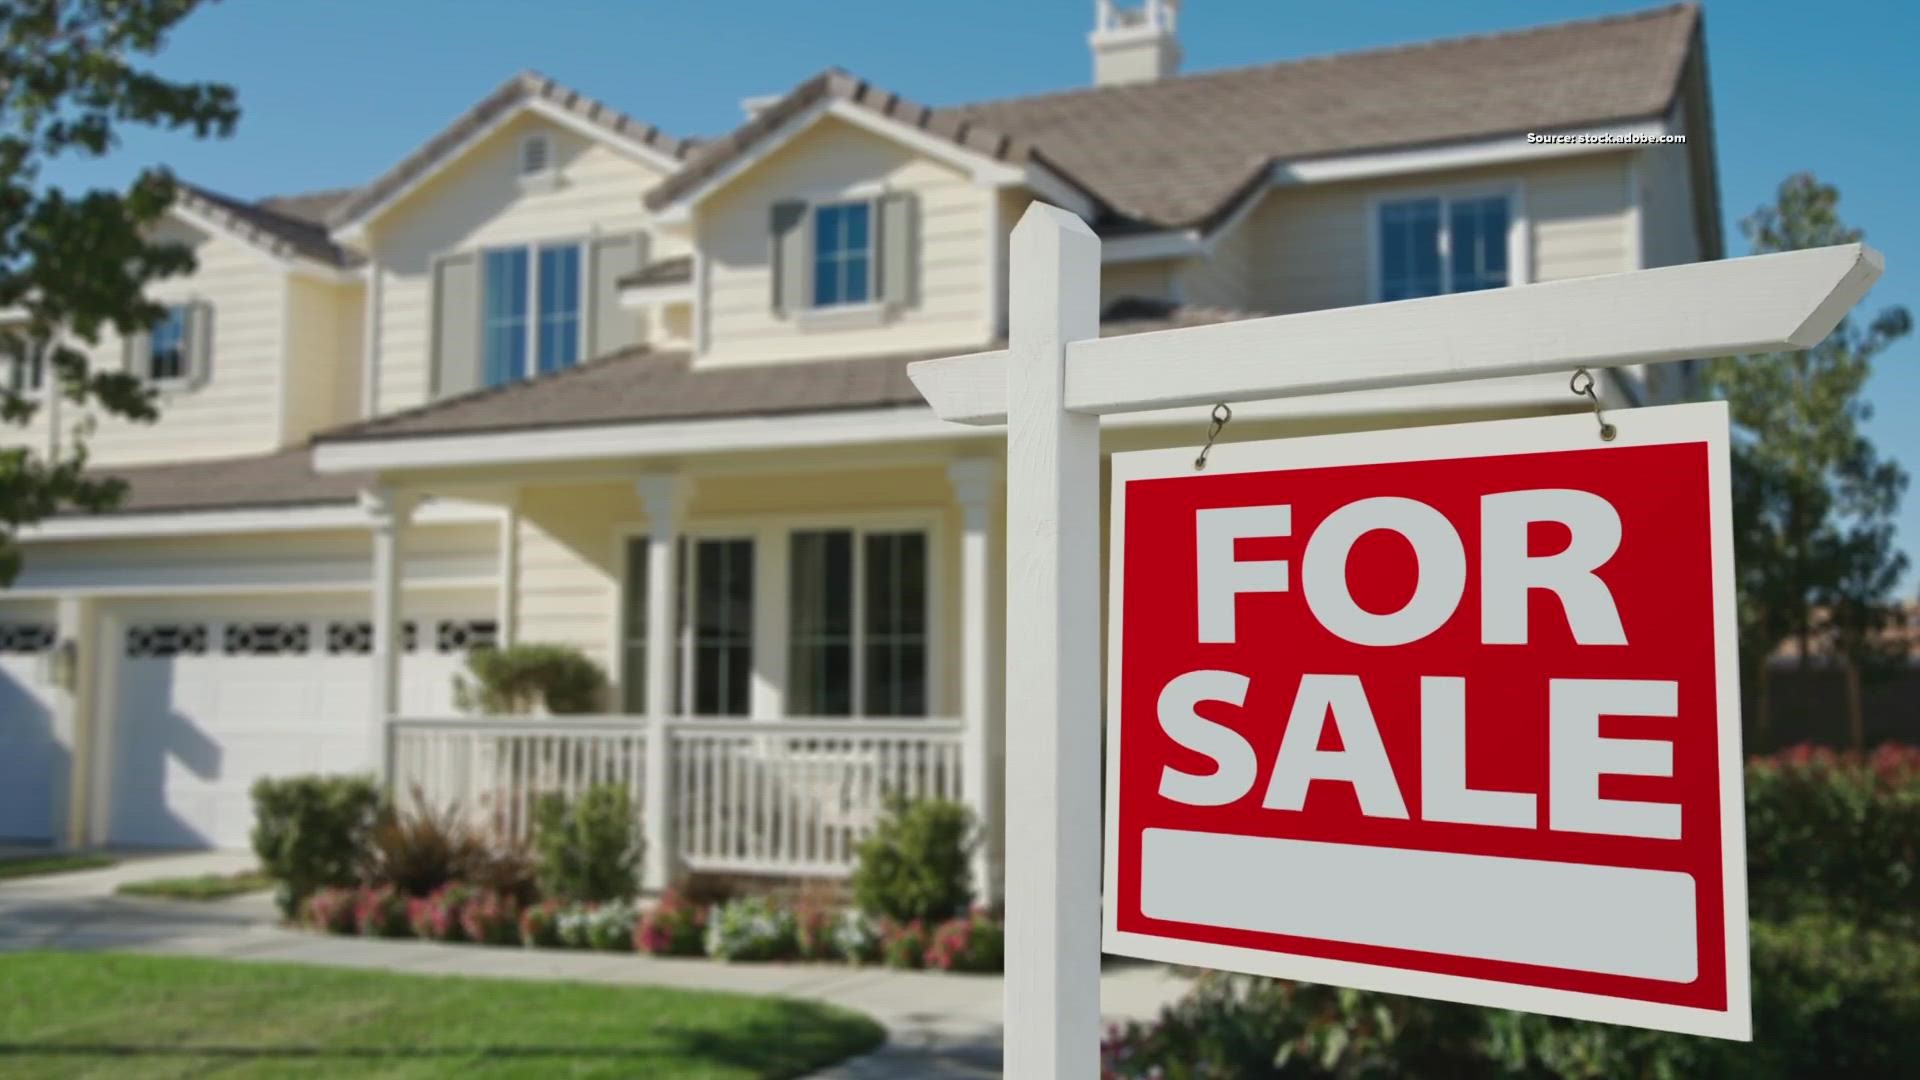 A new report says Greensboro home prices grew the 4th fastest in all of the U.S. The market is keeping realtors busy.